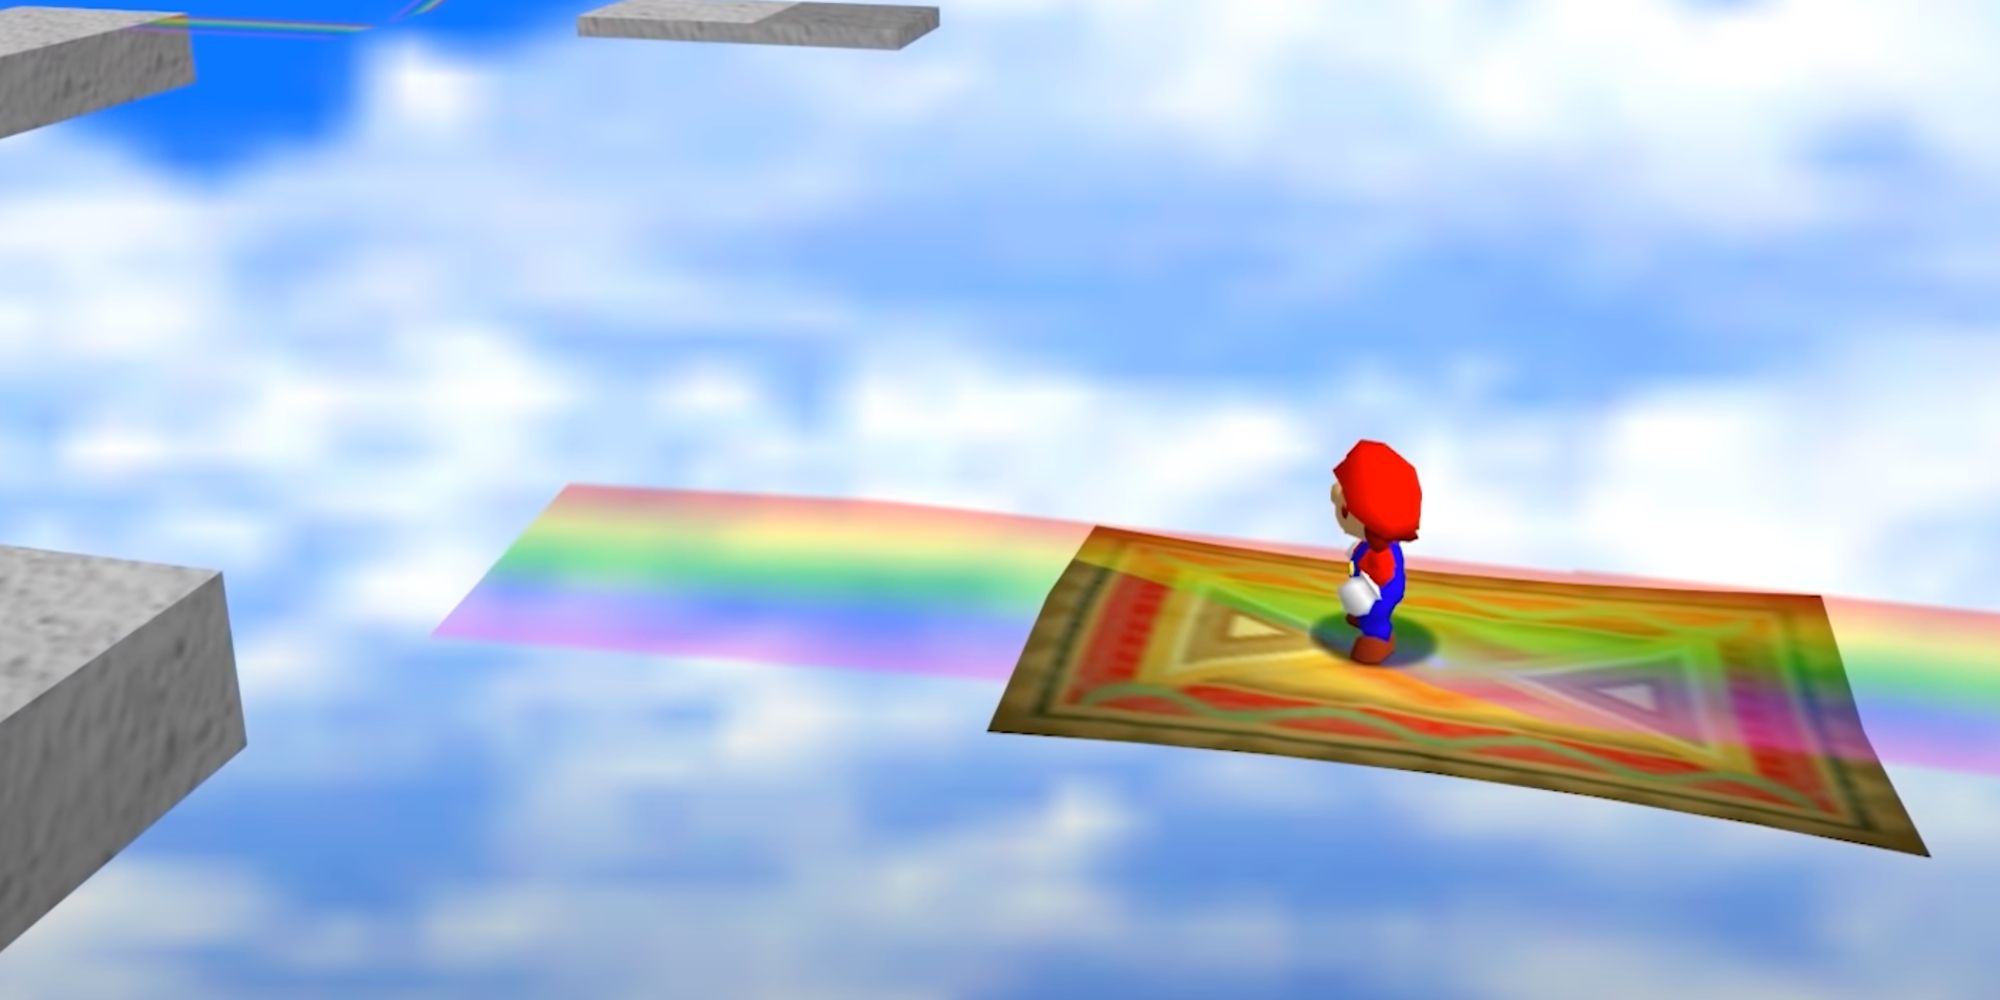 Mario on a flying carpet in Super Mario 64, with a rainbow